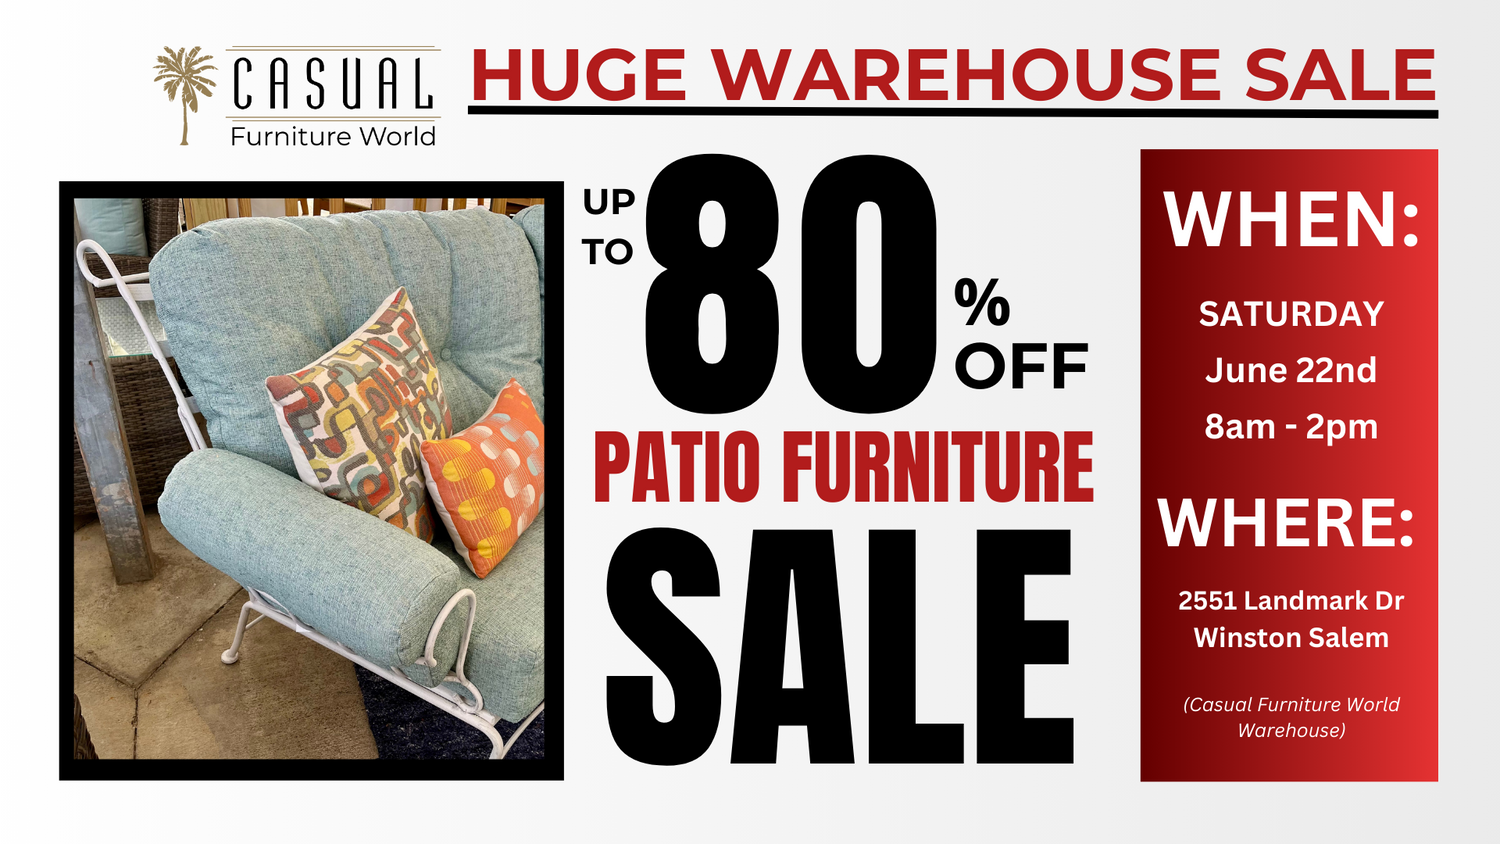 Warehouse Sale - Patio Furniture Sets up to 80% off